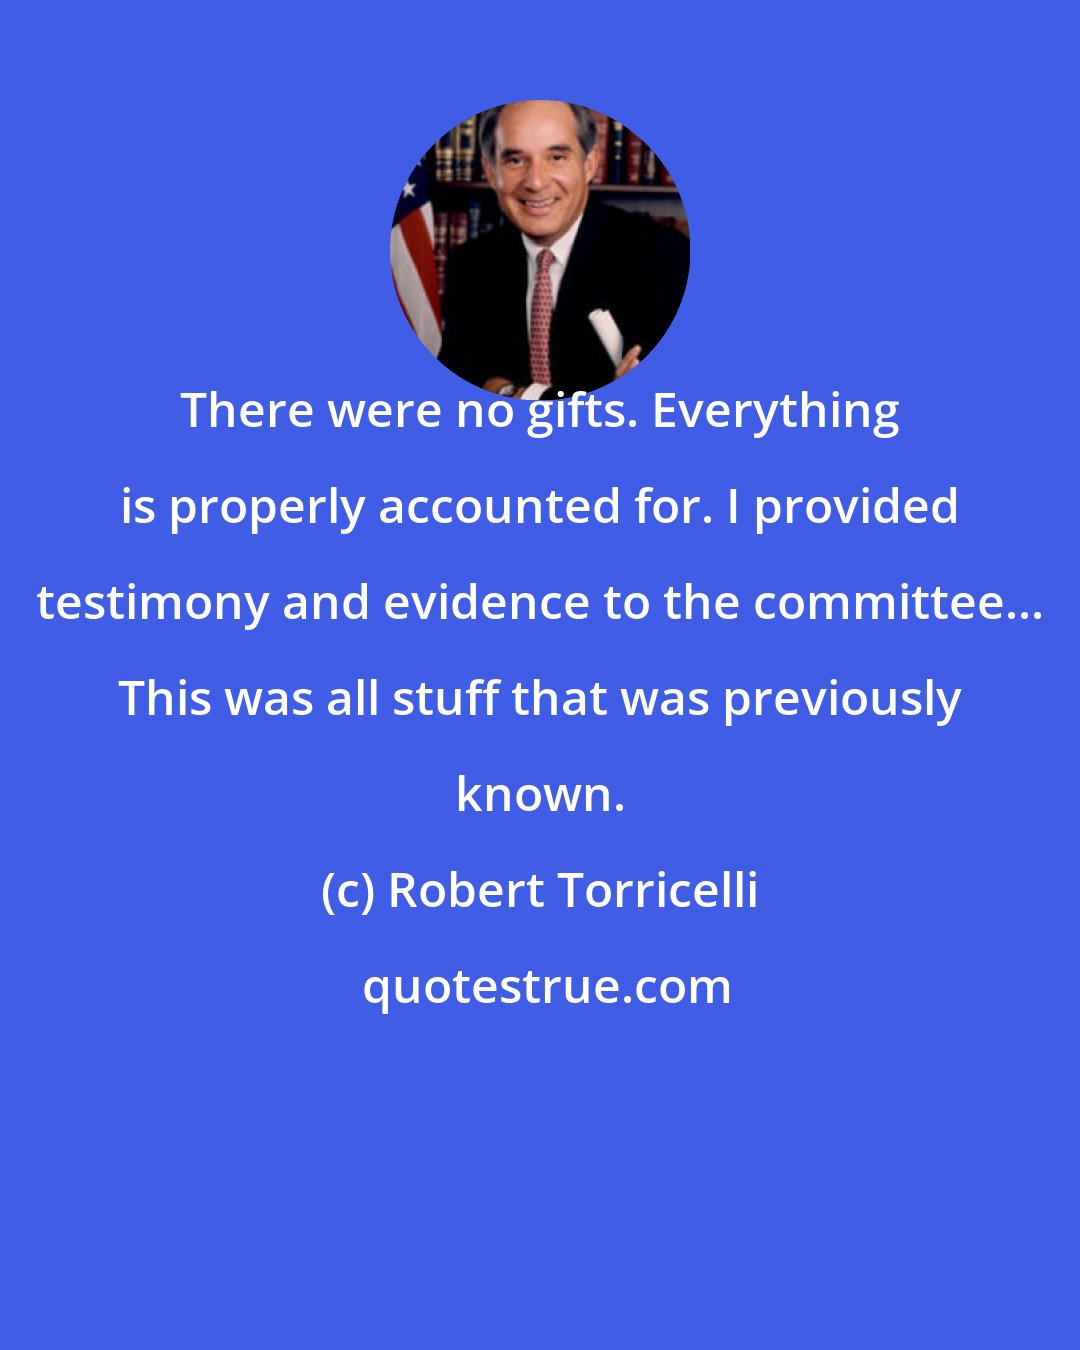 Robert Torricelli: There were no gifts. Everything is properly accounted for. I provided testimony and evidence to the committee... This was all stuff that was previously known.